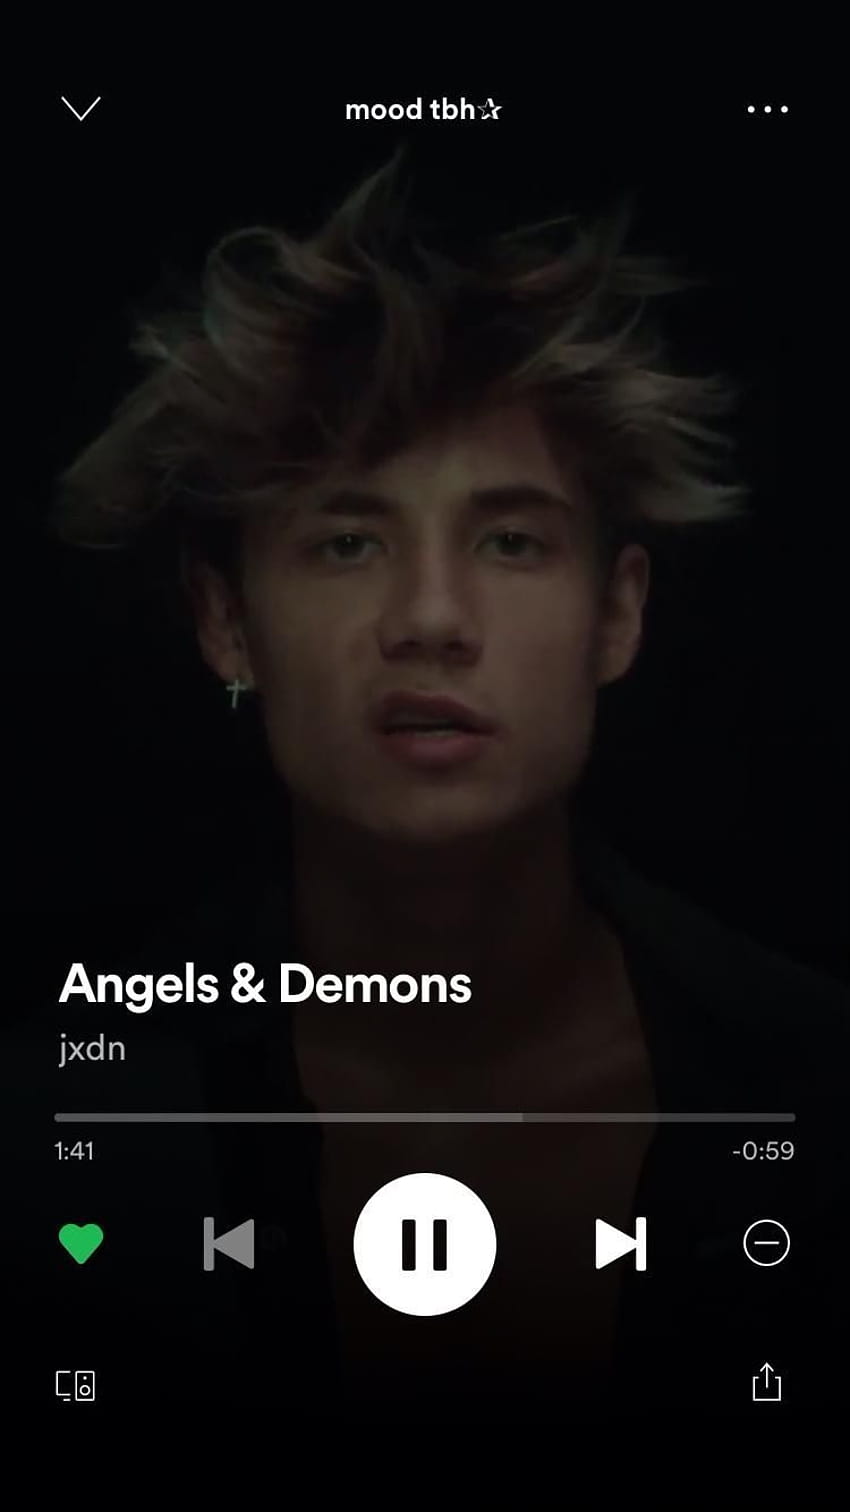 Angels and Demons by jxdn [Video] in 2020 HD phone wallpaper